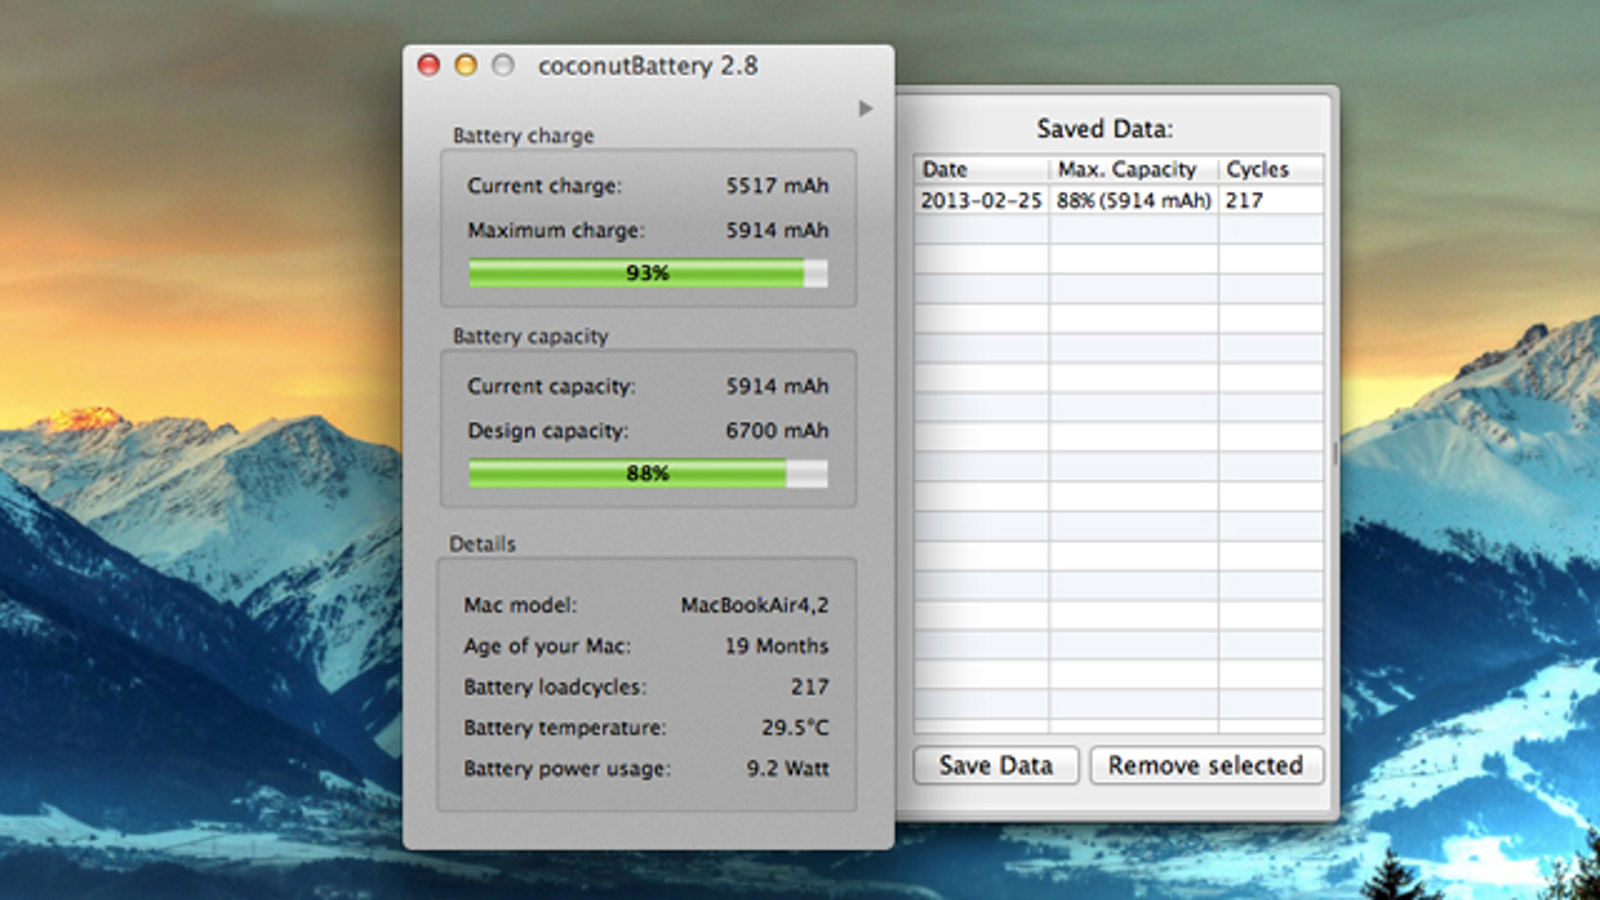 download coconutbattery